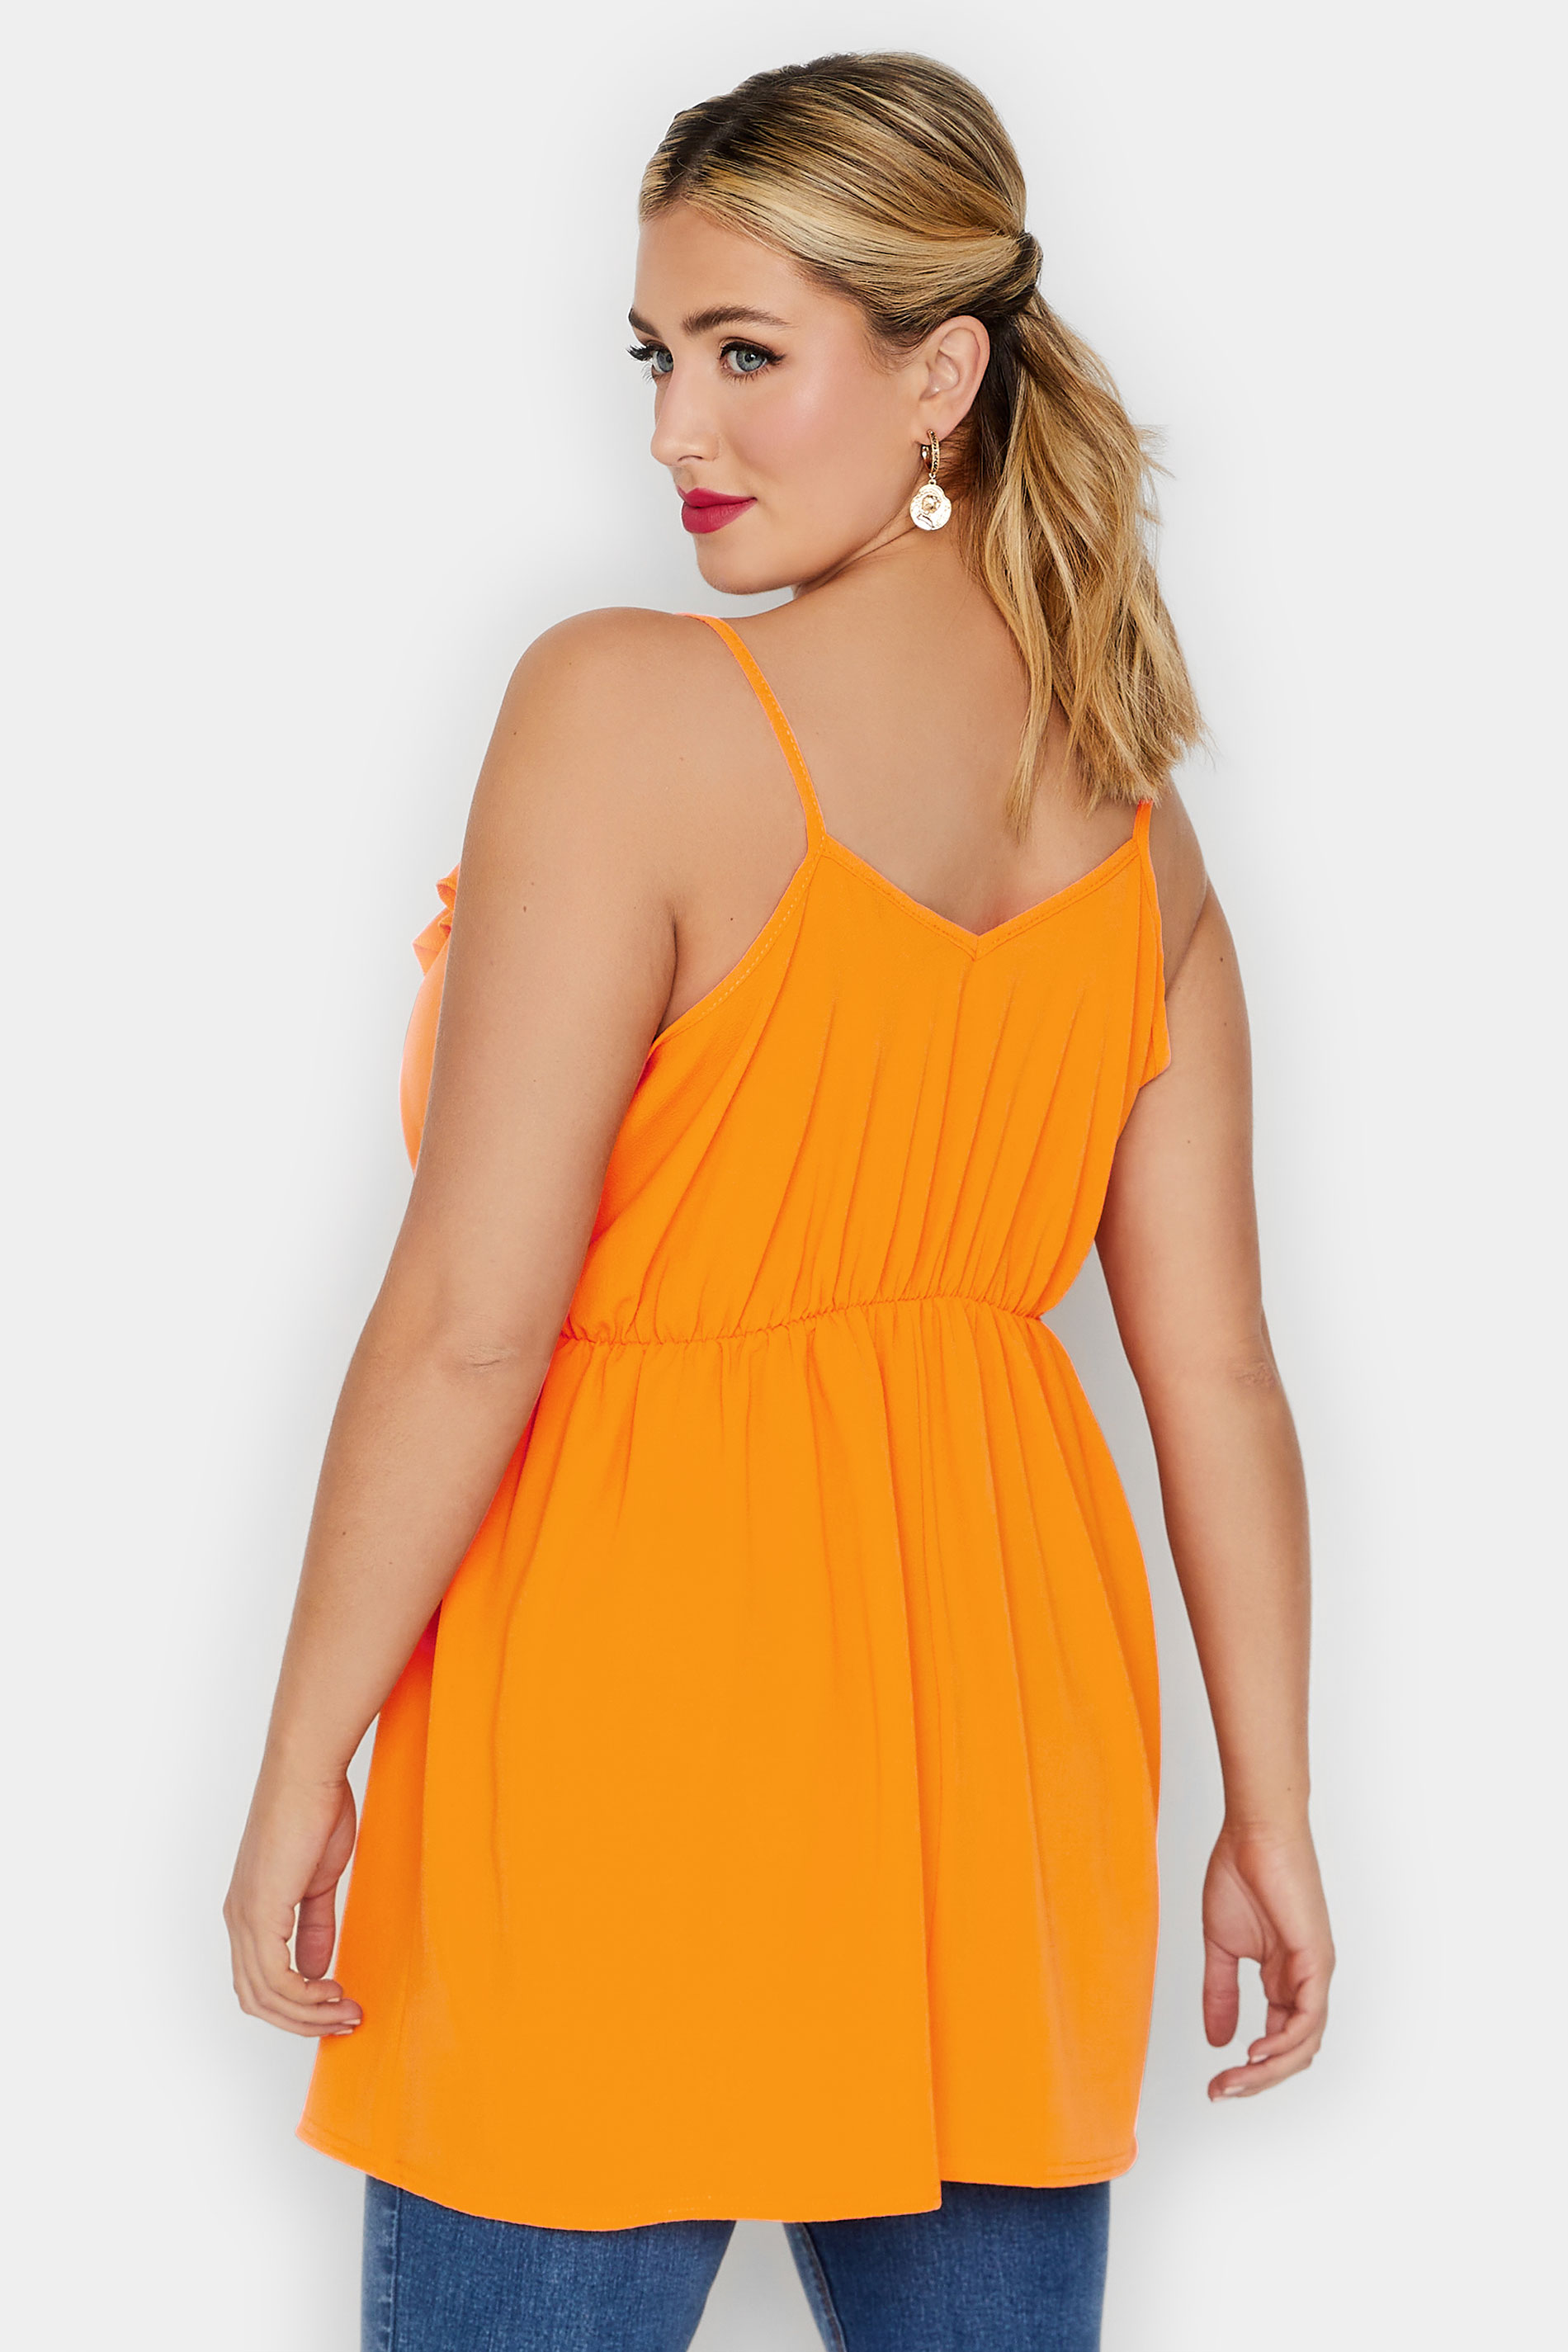 LIMITED COLLECTION Plus Size Orange Wrap Cami Vest Top | Yours Clothing 3